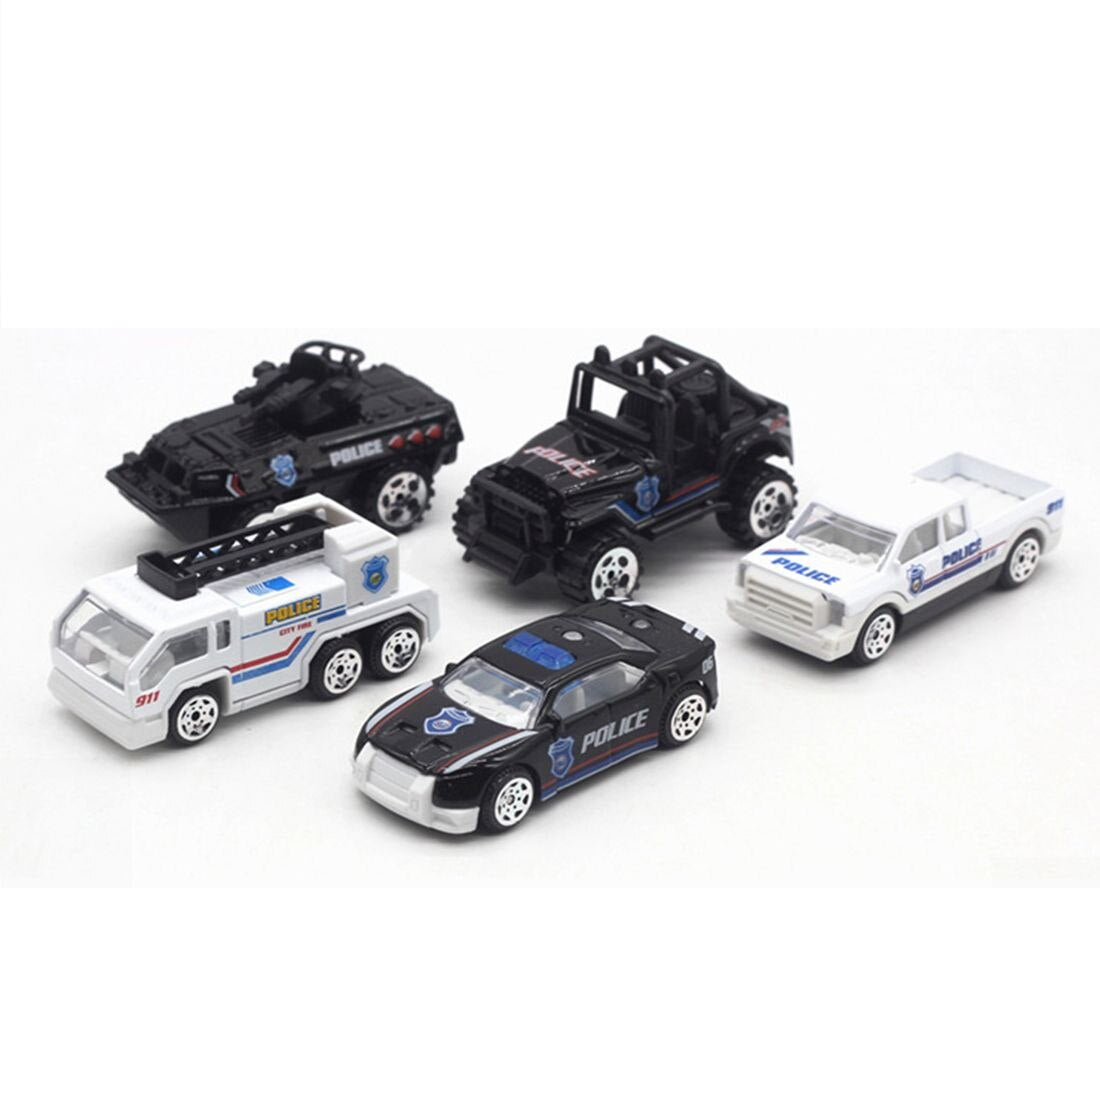 5 piece set police rescue team model Hot 1:64 alloy car educational toy car Christmas birthday gift